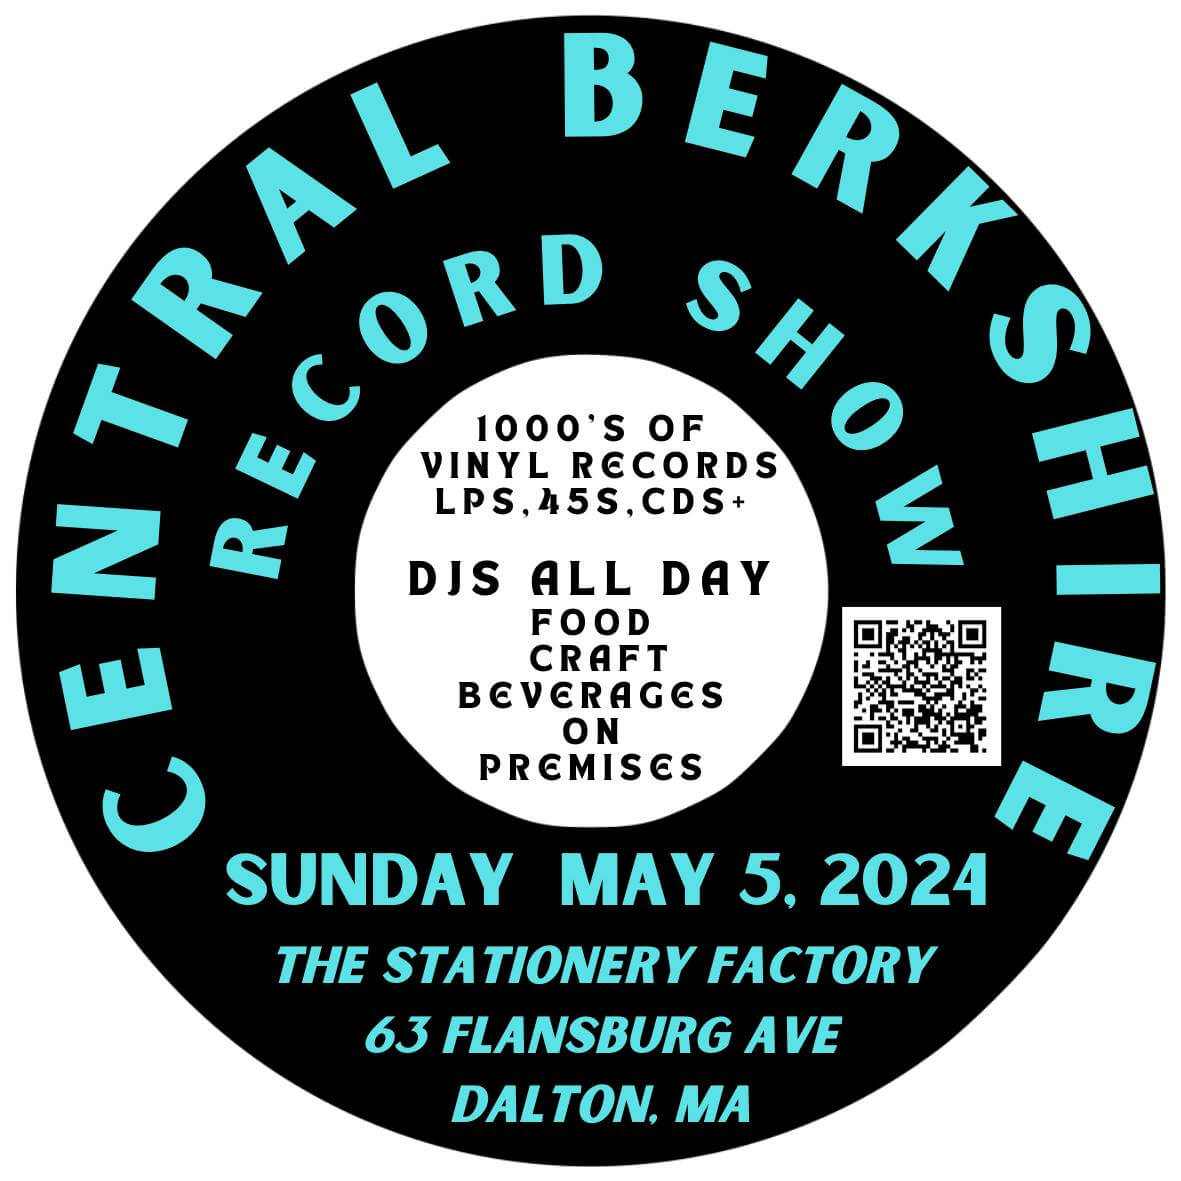 Check out thousands of records, cds, and more at the Berkshirecat Record Show